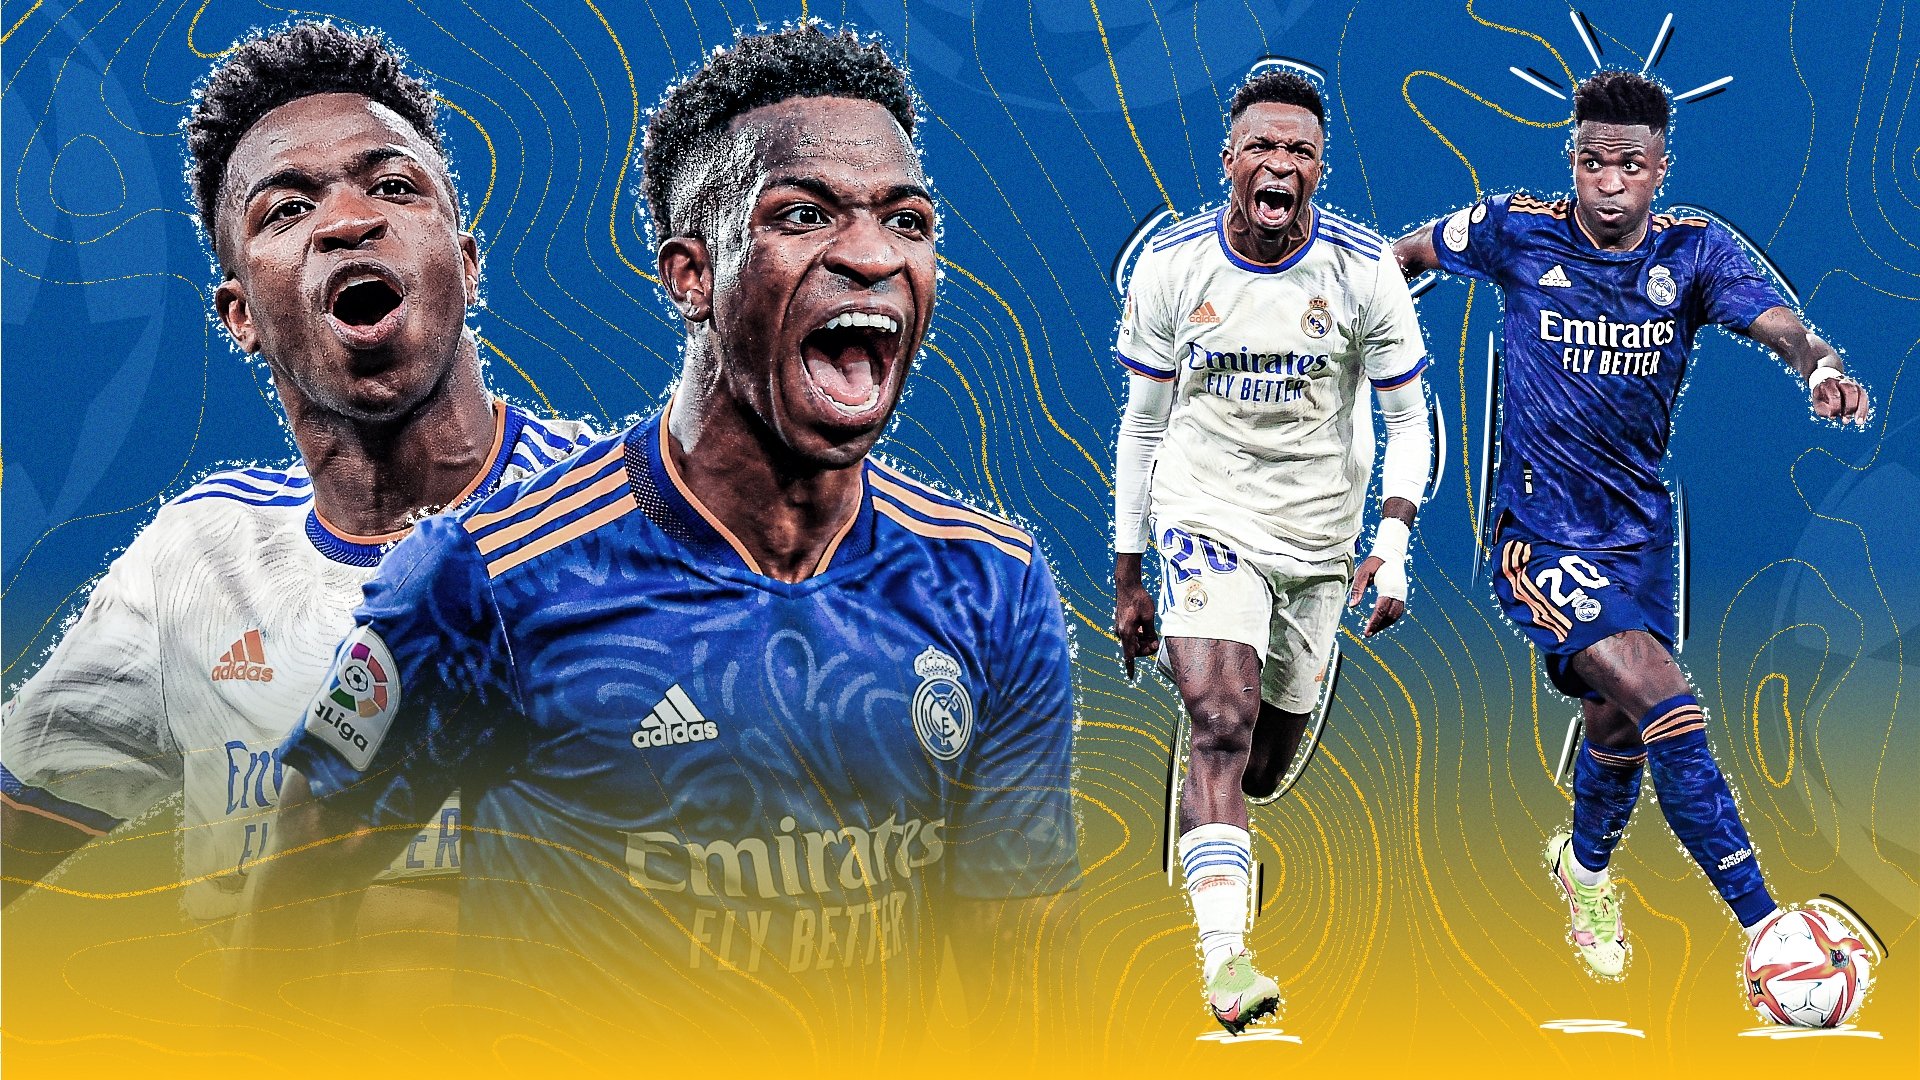 Vinicius' redemption: Real Madrid's Brazilian star finally fulfilling potential. Goal.com US